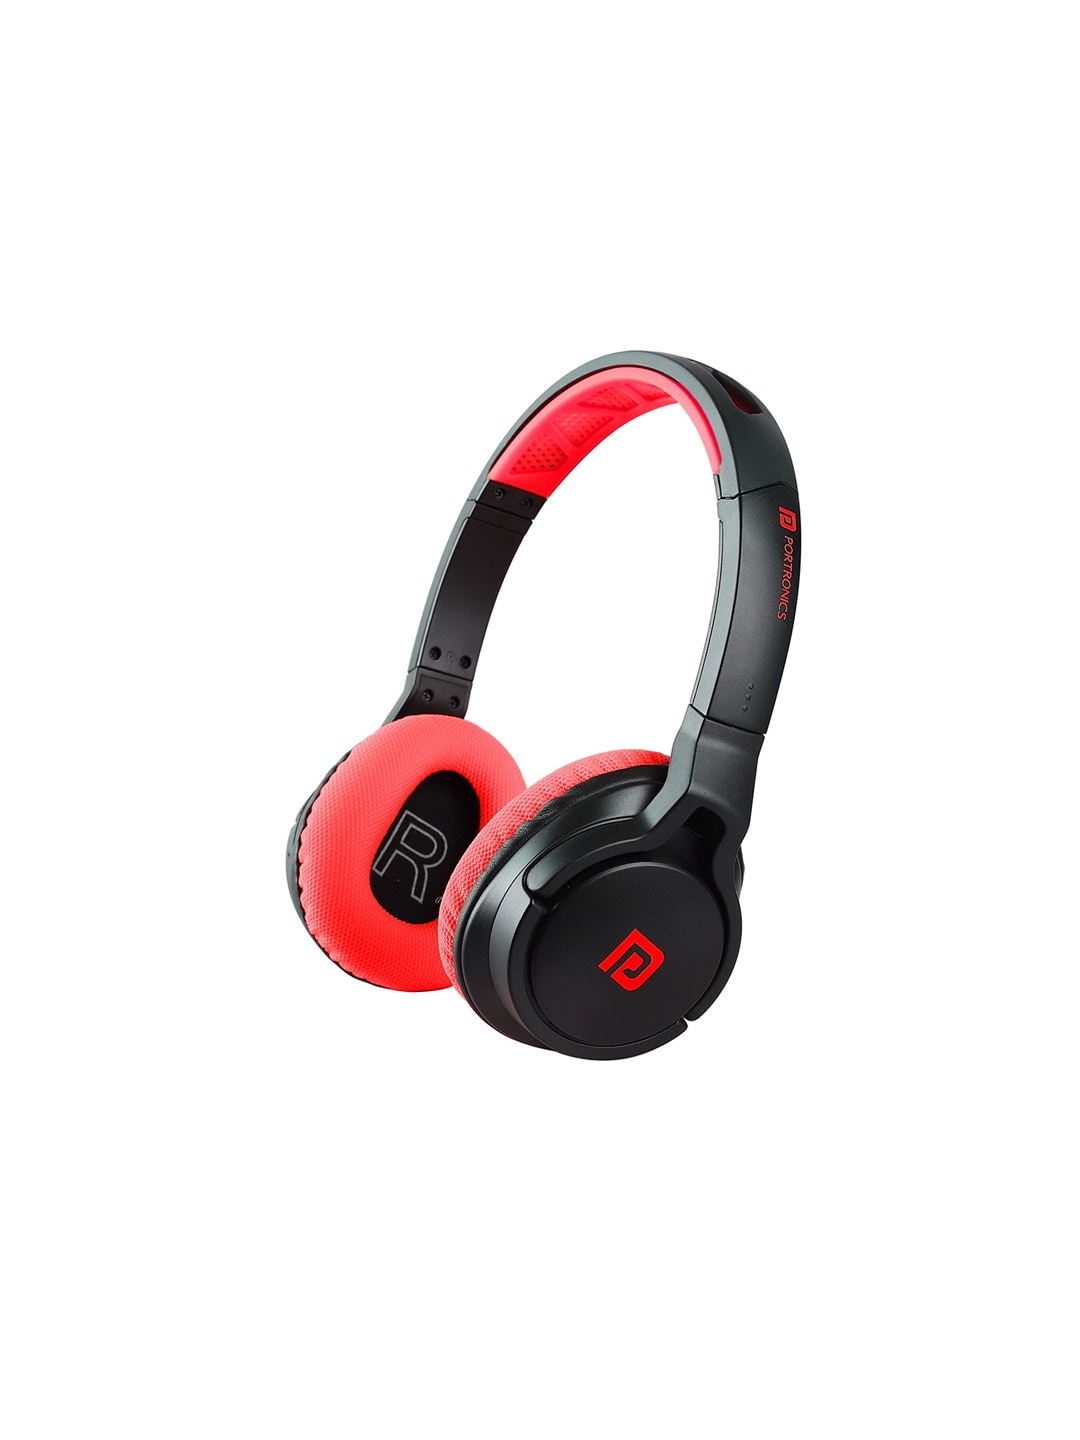 Portronics Red & Black Solid Muffs M1 Wireless Bluetooth Over-Ear Headphone Price in India